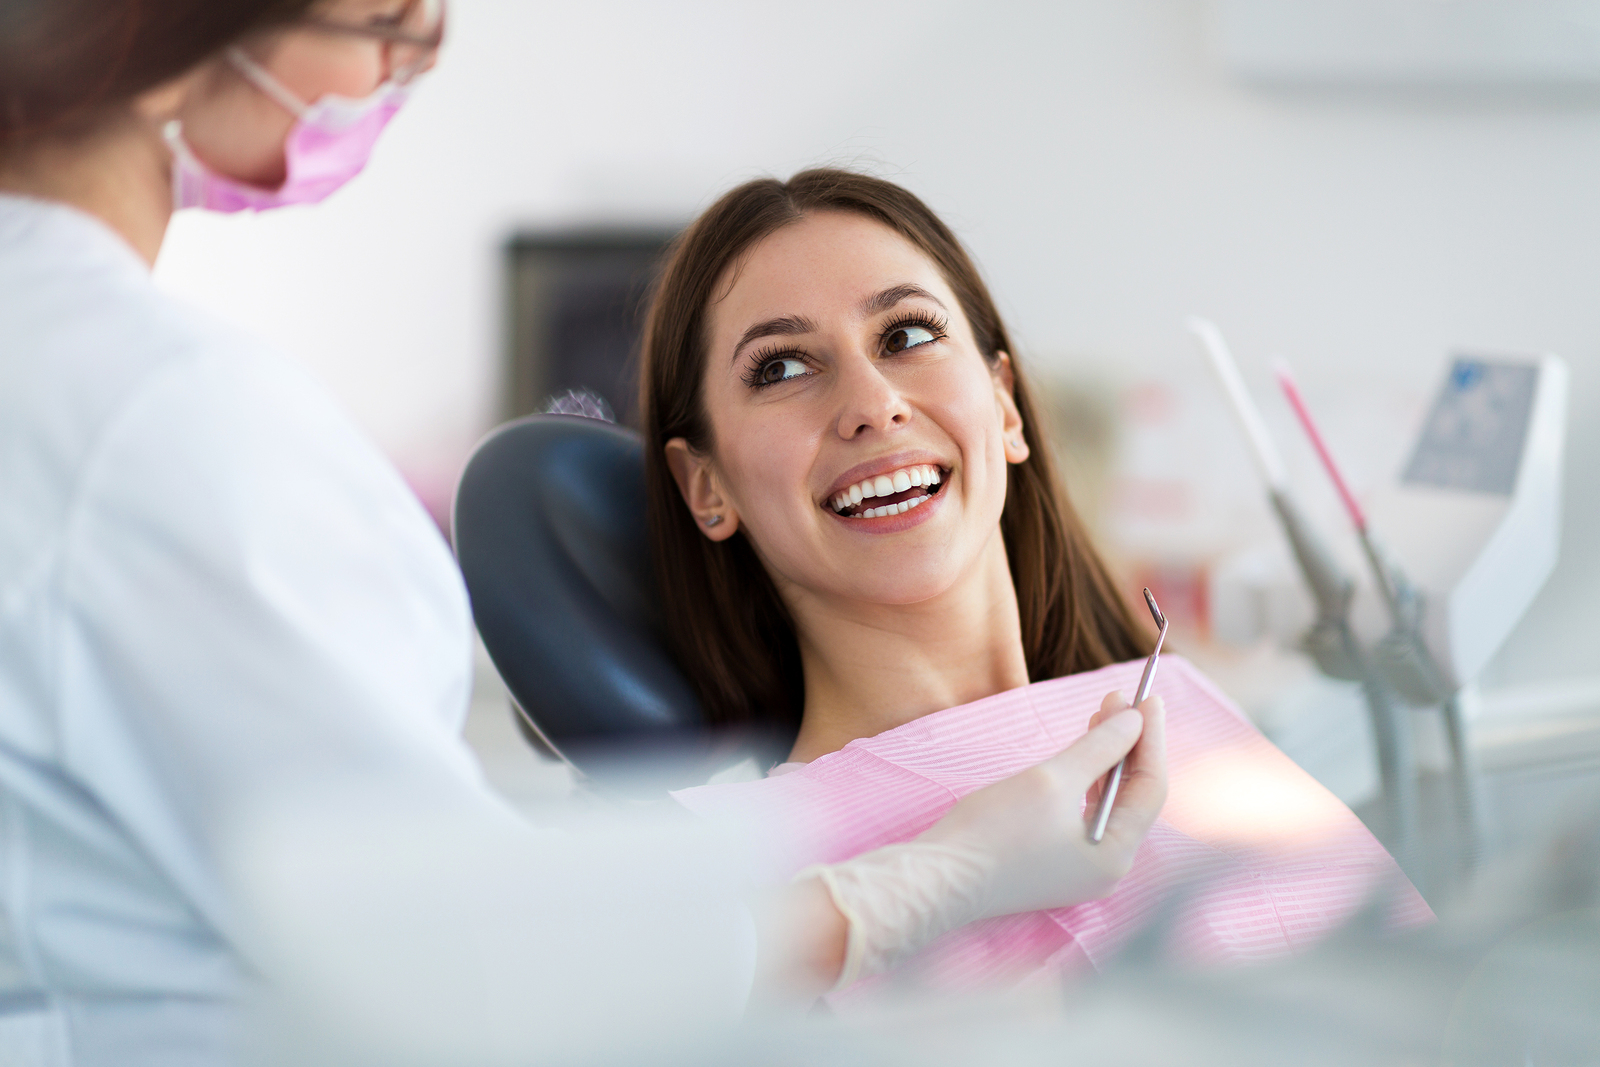 common myths and the corresponding facts about dental implants